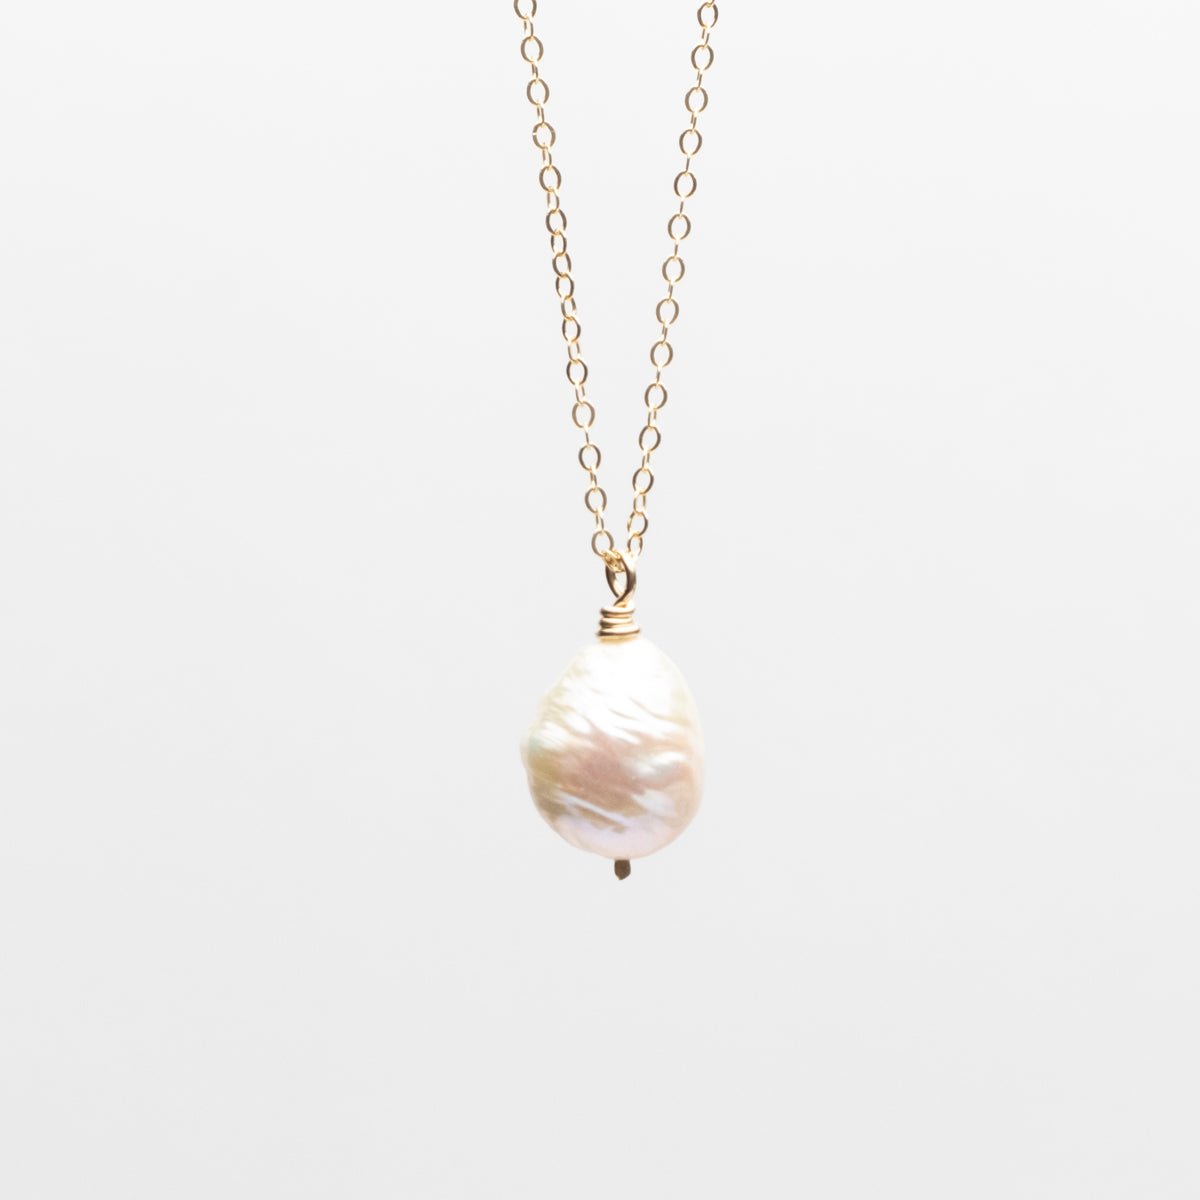 Freshwater baroque pearl hangs a the end of a 14K gold filled chain. Designed by Kari Phillips in Portland, Oregon.